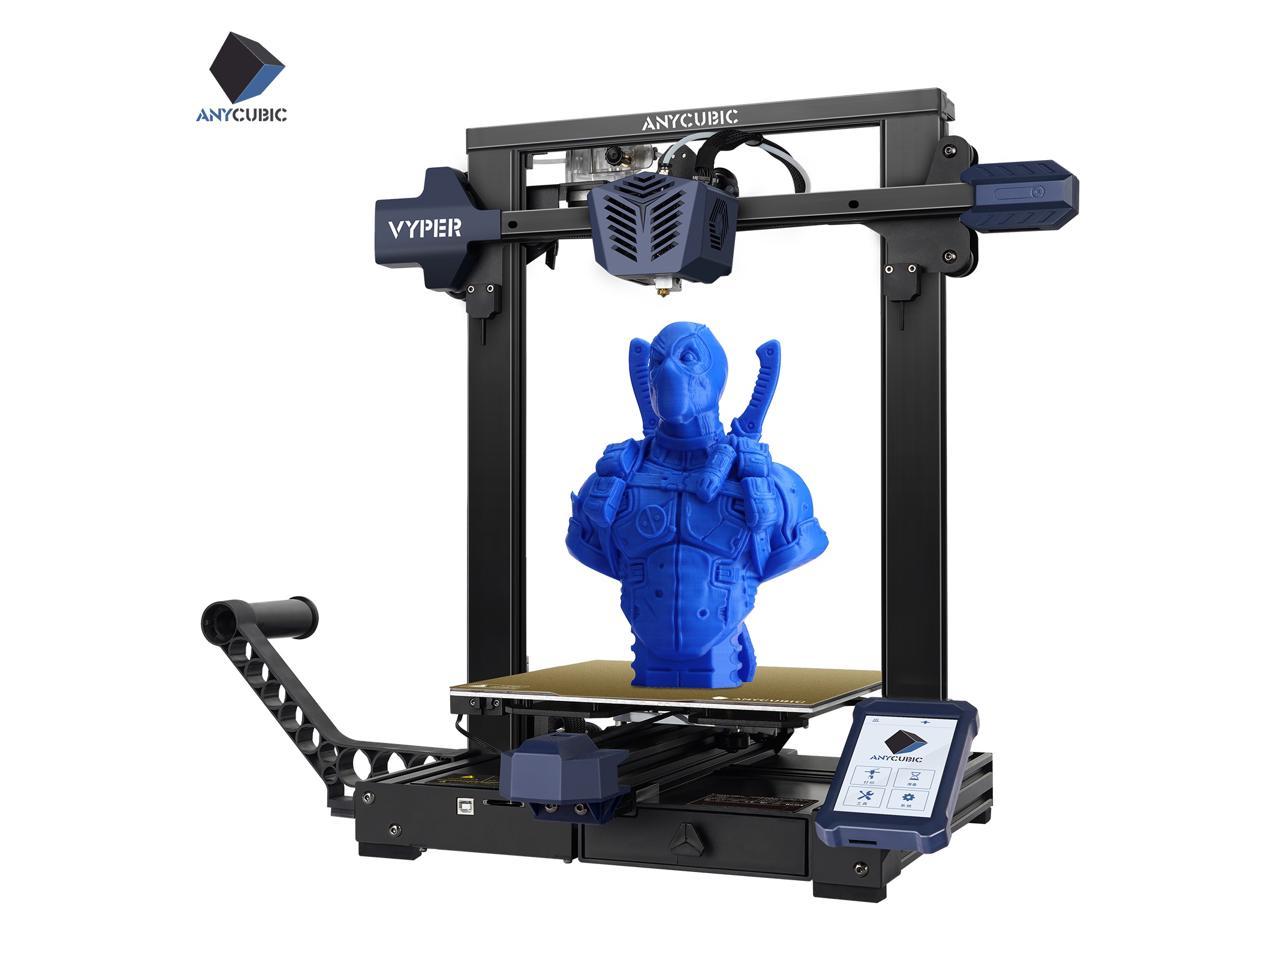 ANYCUBIC Vyper 3D Printer Auto Leveling Upgrade Fast FDM Printer Integrated Structure Design with TMC2209 32-bit Silent Mainboard Removable Magnetic Platform 9.6 x 9.6 x 10.2 Printing Size 